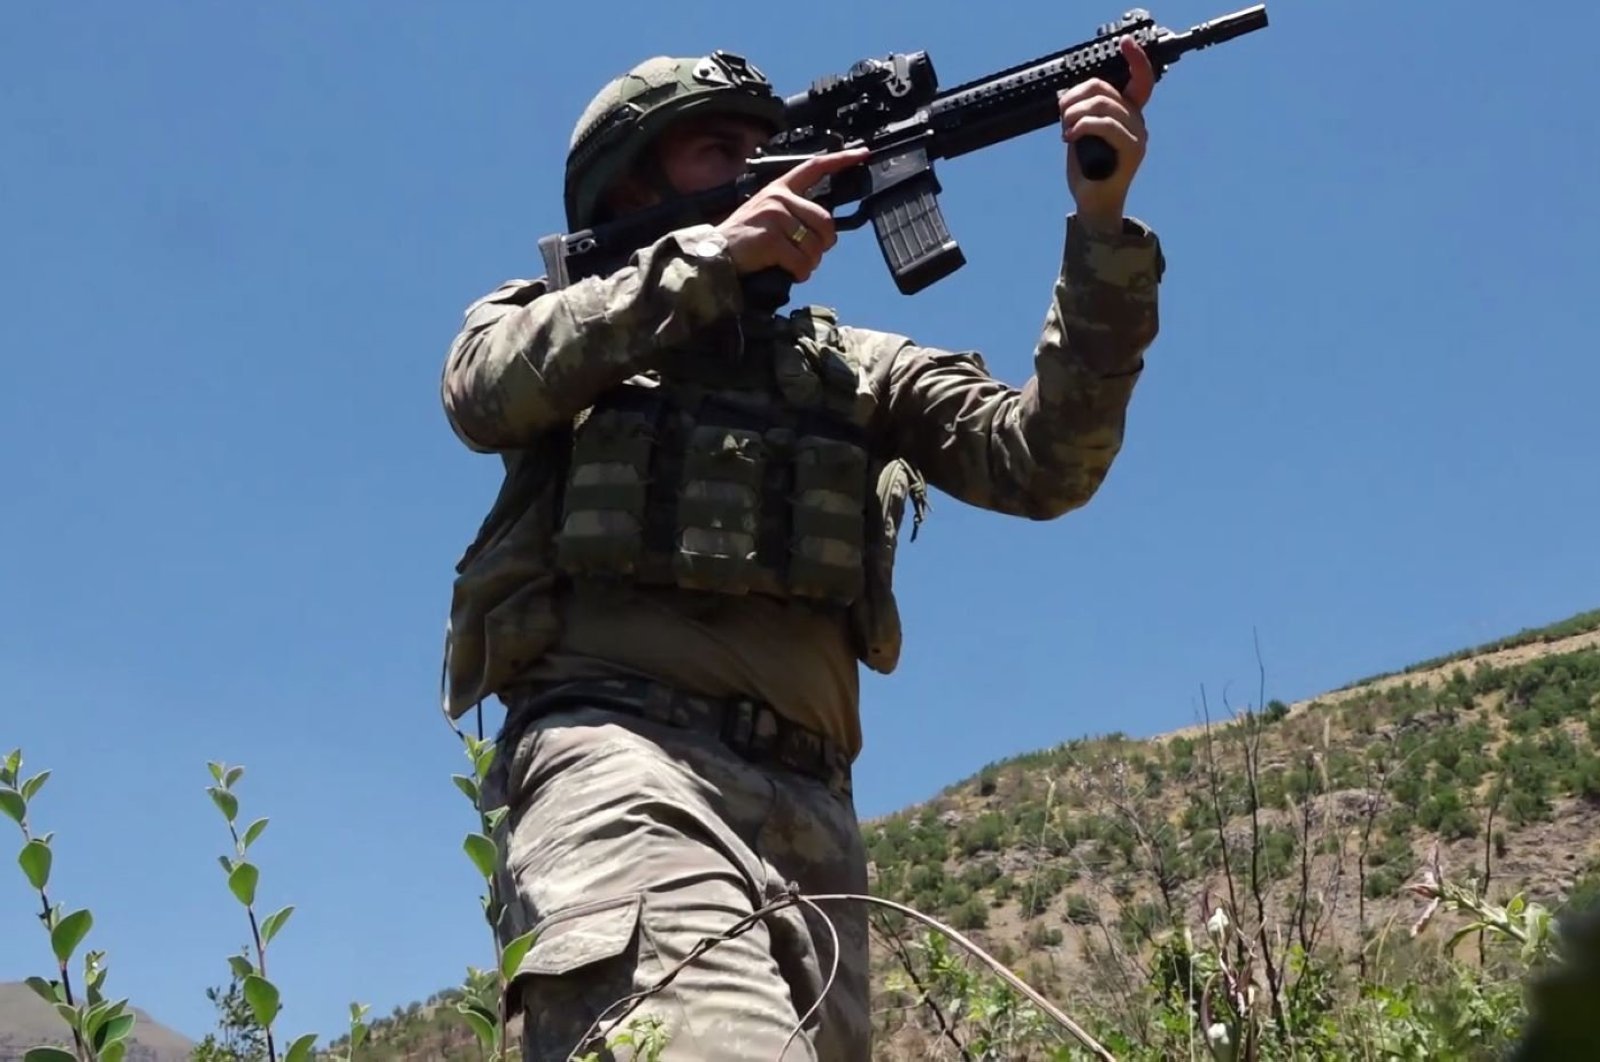 Turkish security forces conduct an operation against the PKK terrorist organization in northern Iraq, Sept. 7, 2020. (DHA Photo)